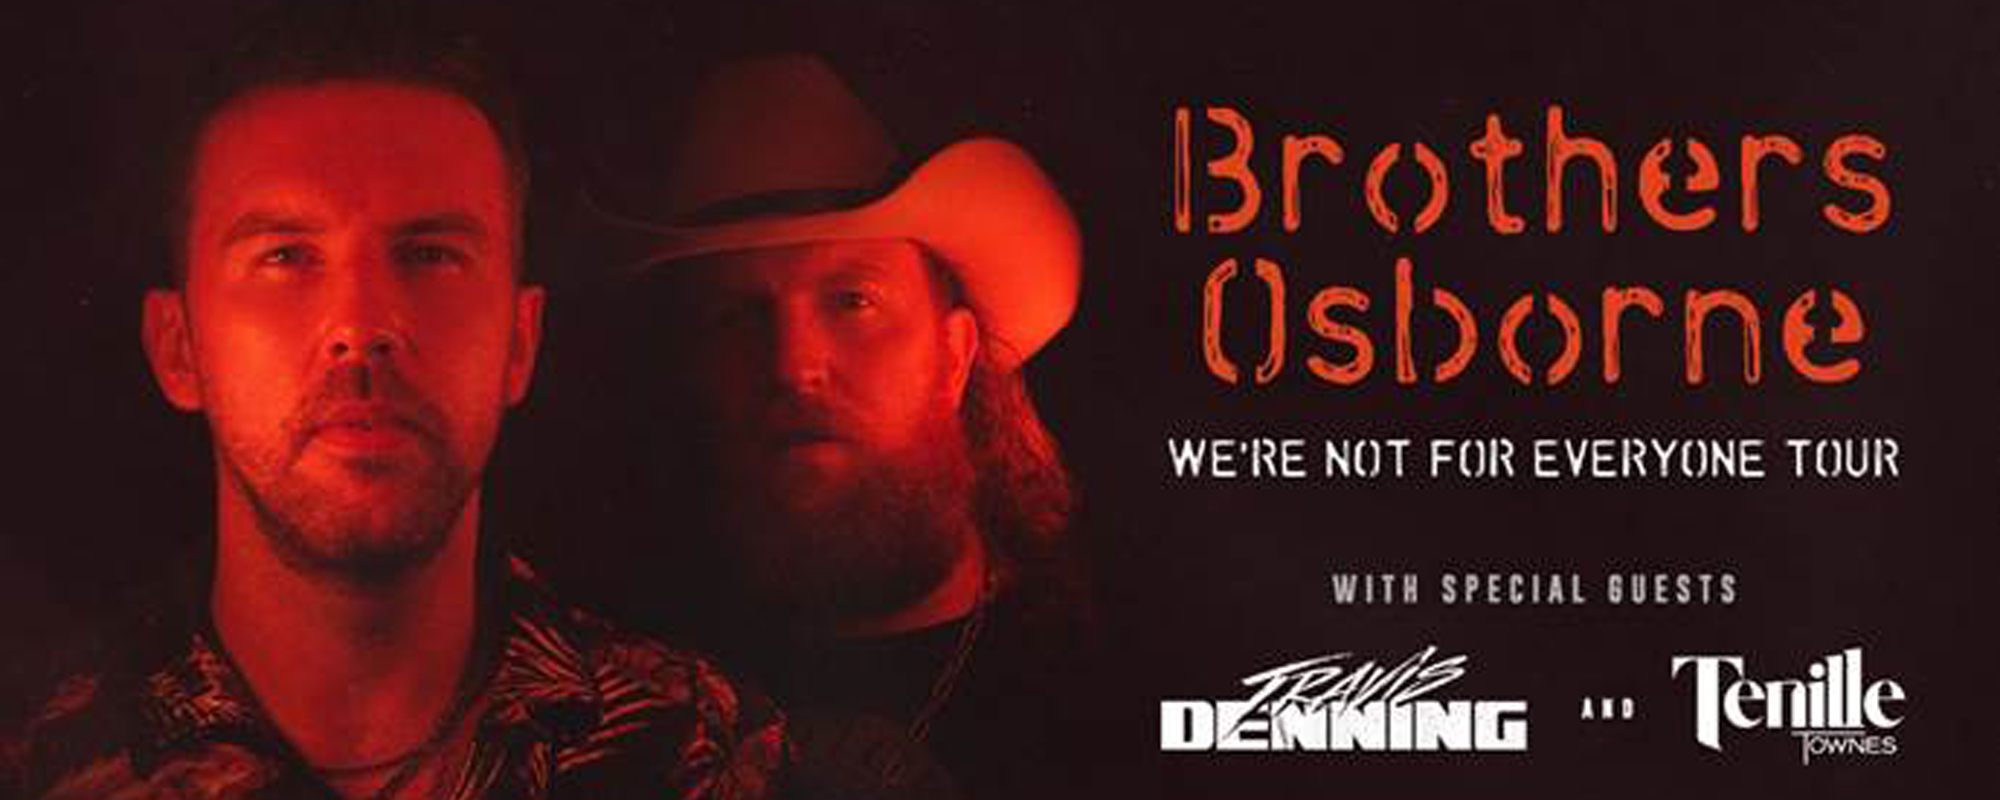 Brothers Osborne Announce We’re Not For Everyone Tour Dates, Tease New Song